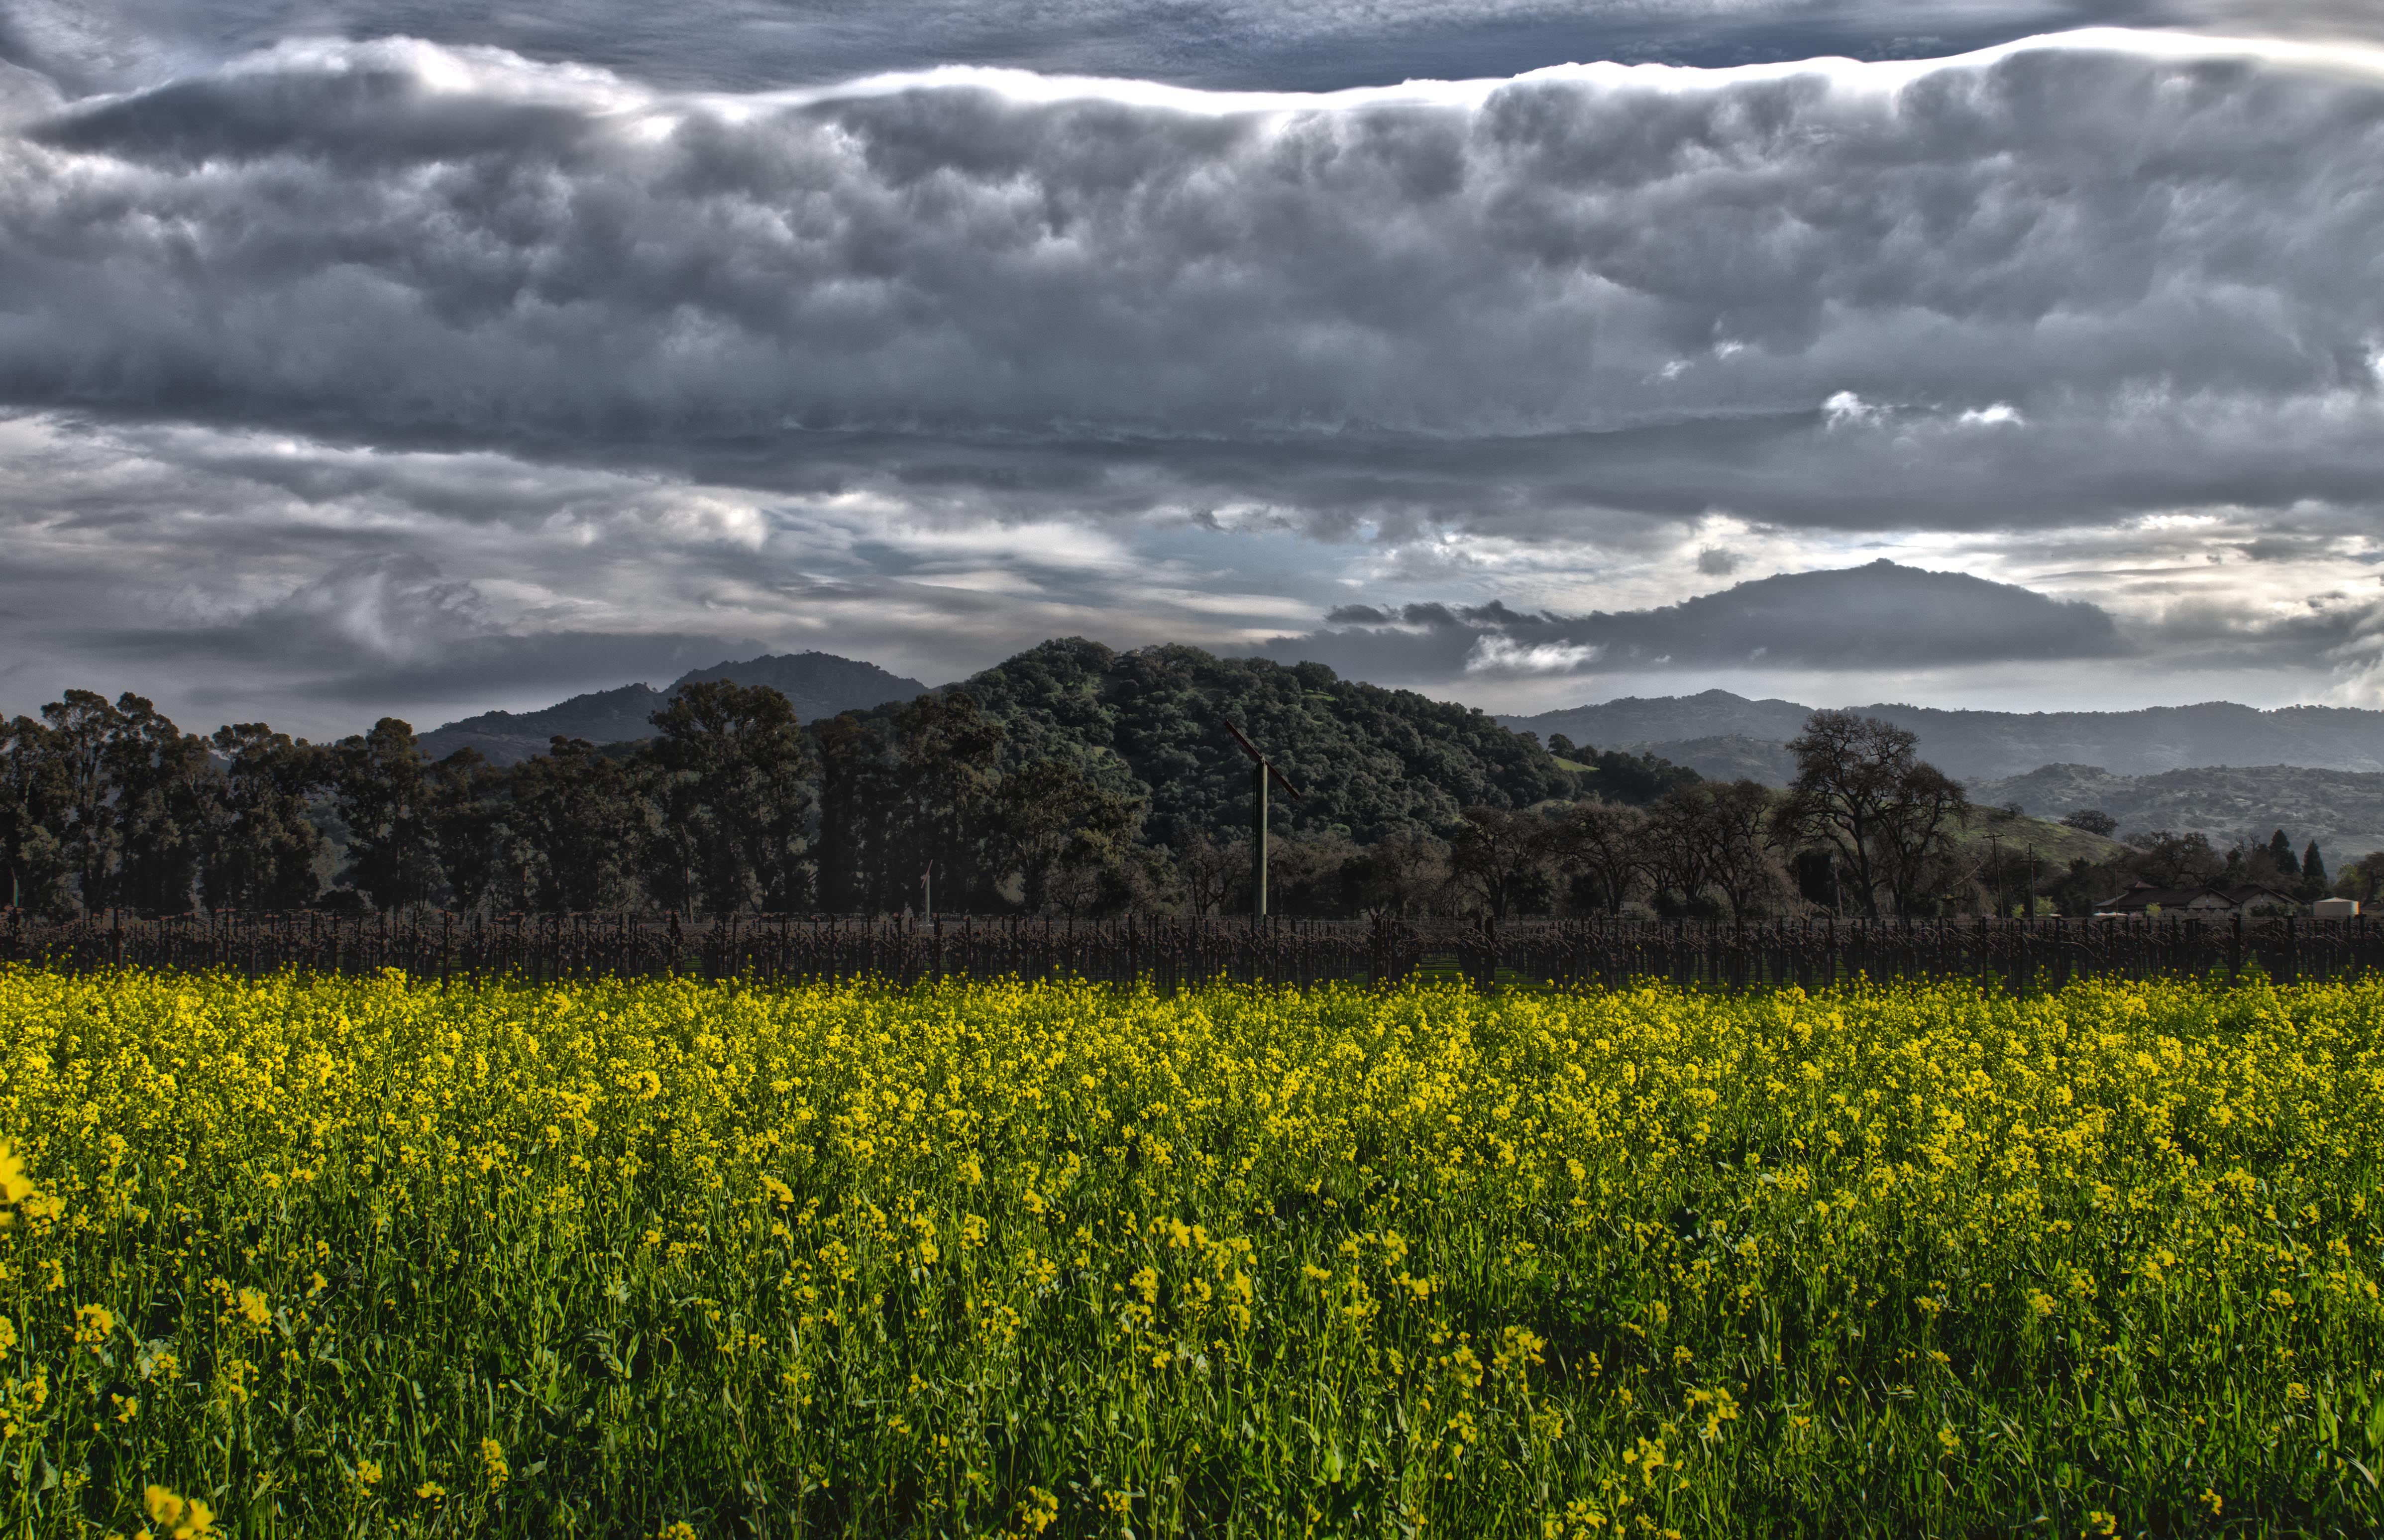 Wallpaper, California, county, trees, mountains, green, yellow, clouds, spring, day, tour, wine, cloudy, dramatic, stormy, tourist, hills, napa, bloom, destination, mustard, agriculture, northern, making, HDR, touring, viticulture 4790x3094